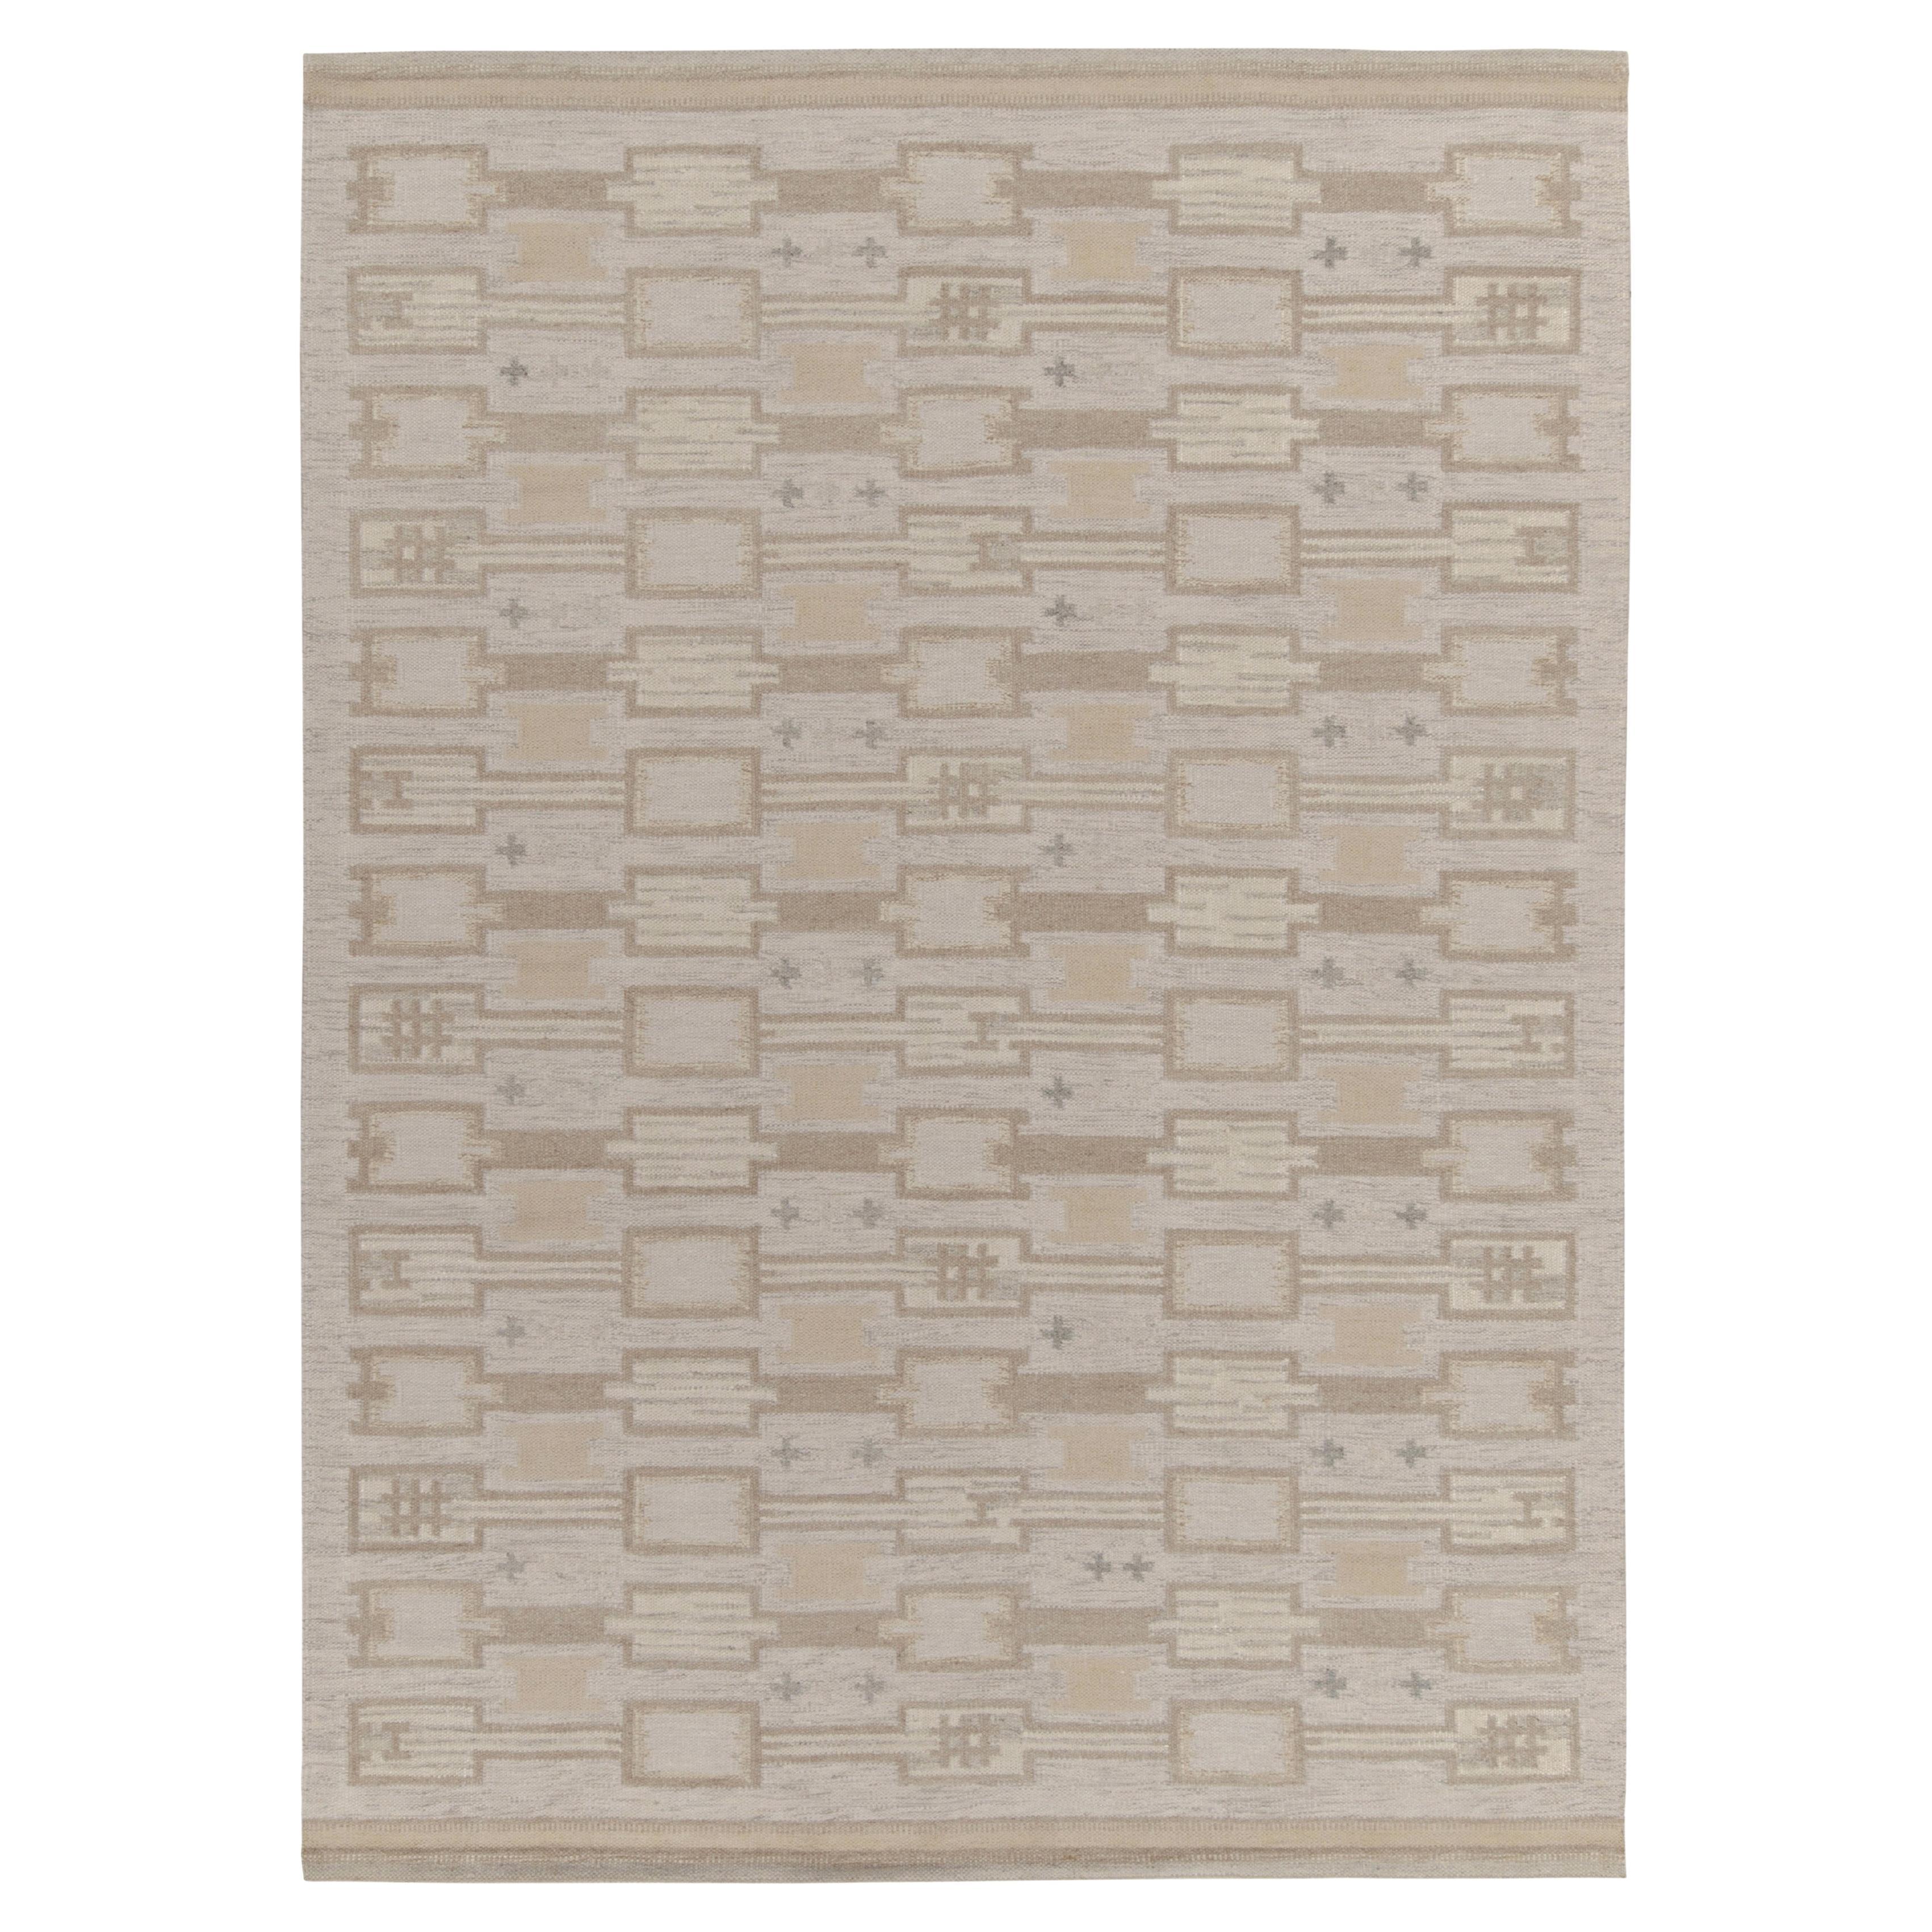 Rug & Kilim’s Scandinavian Style Kilim in Beige and Gray Geometric Patterns For Sale